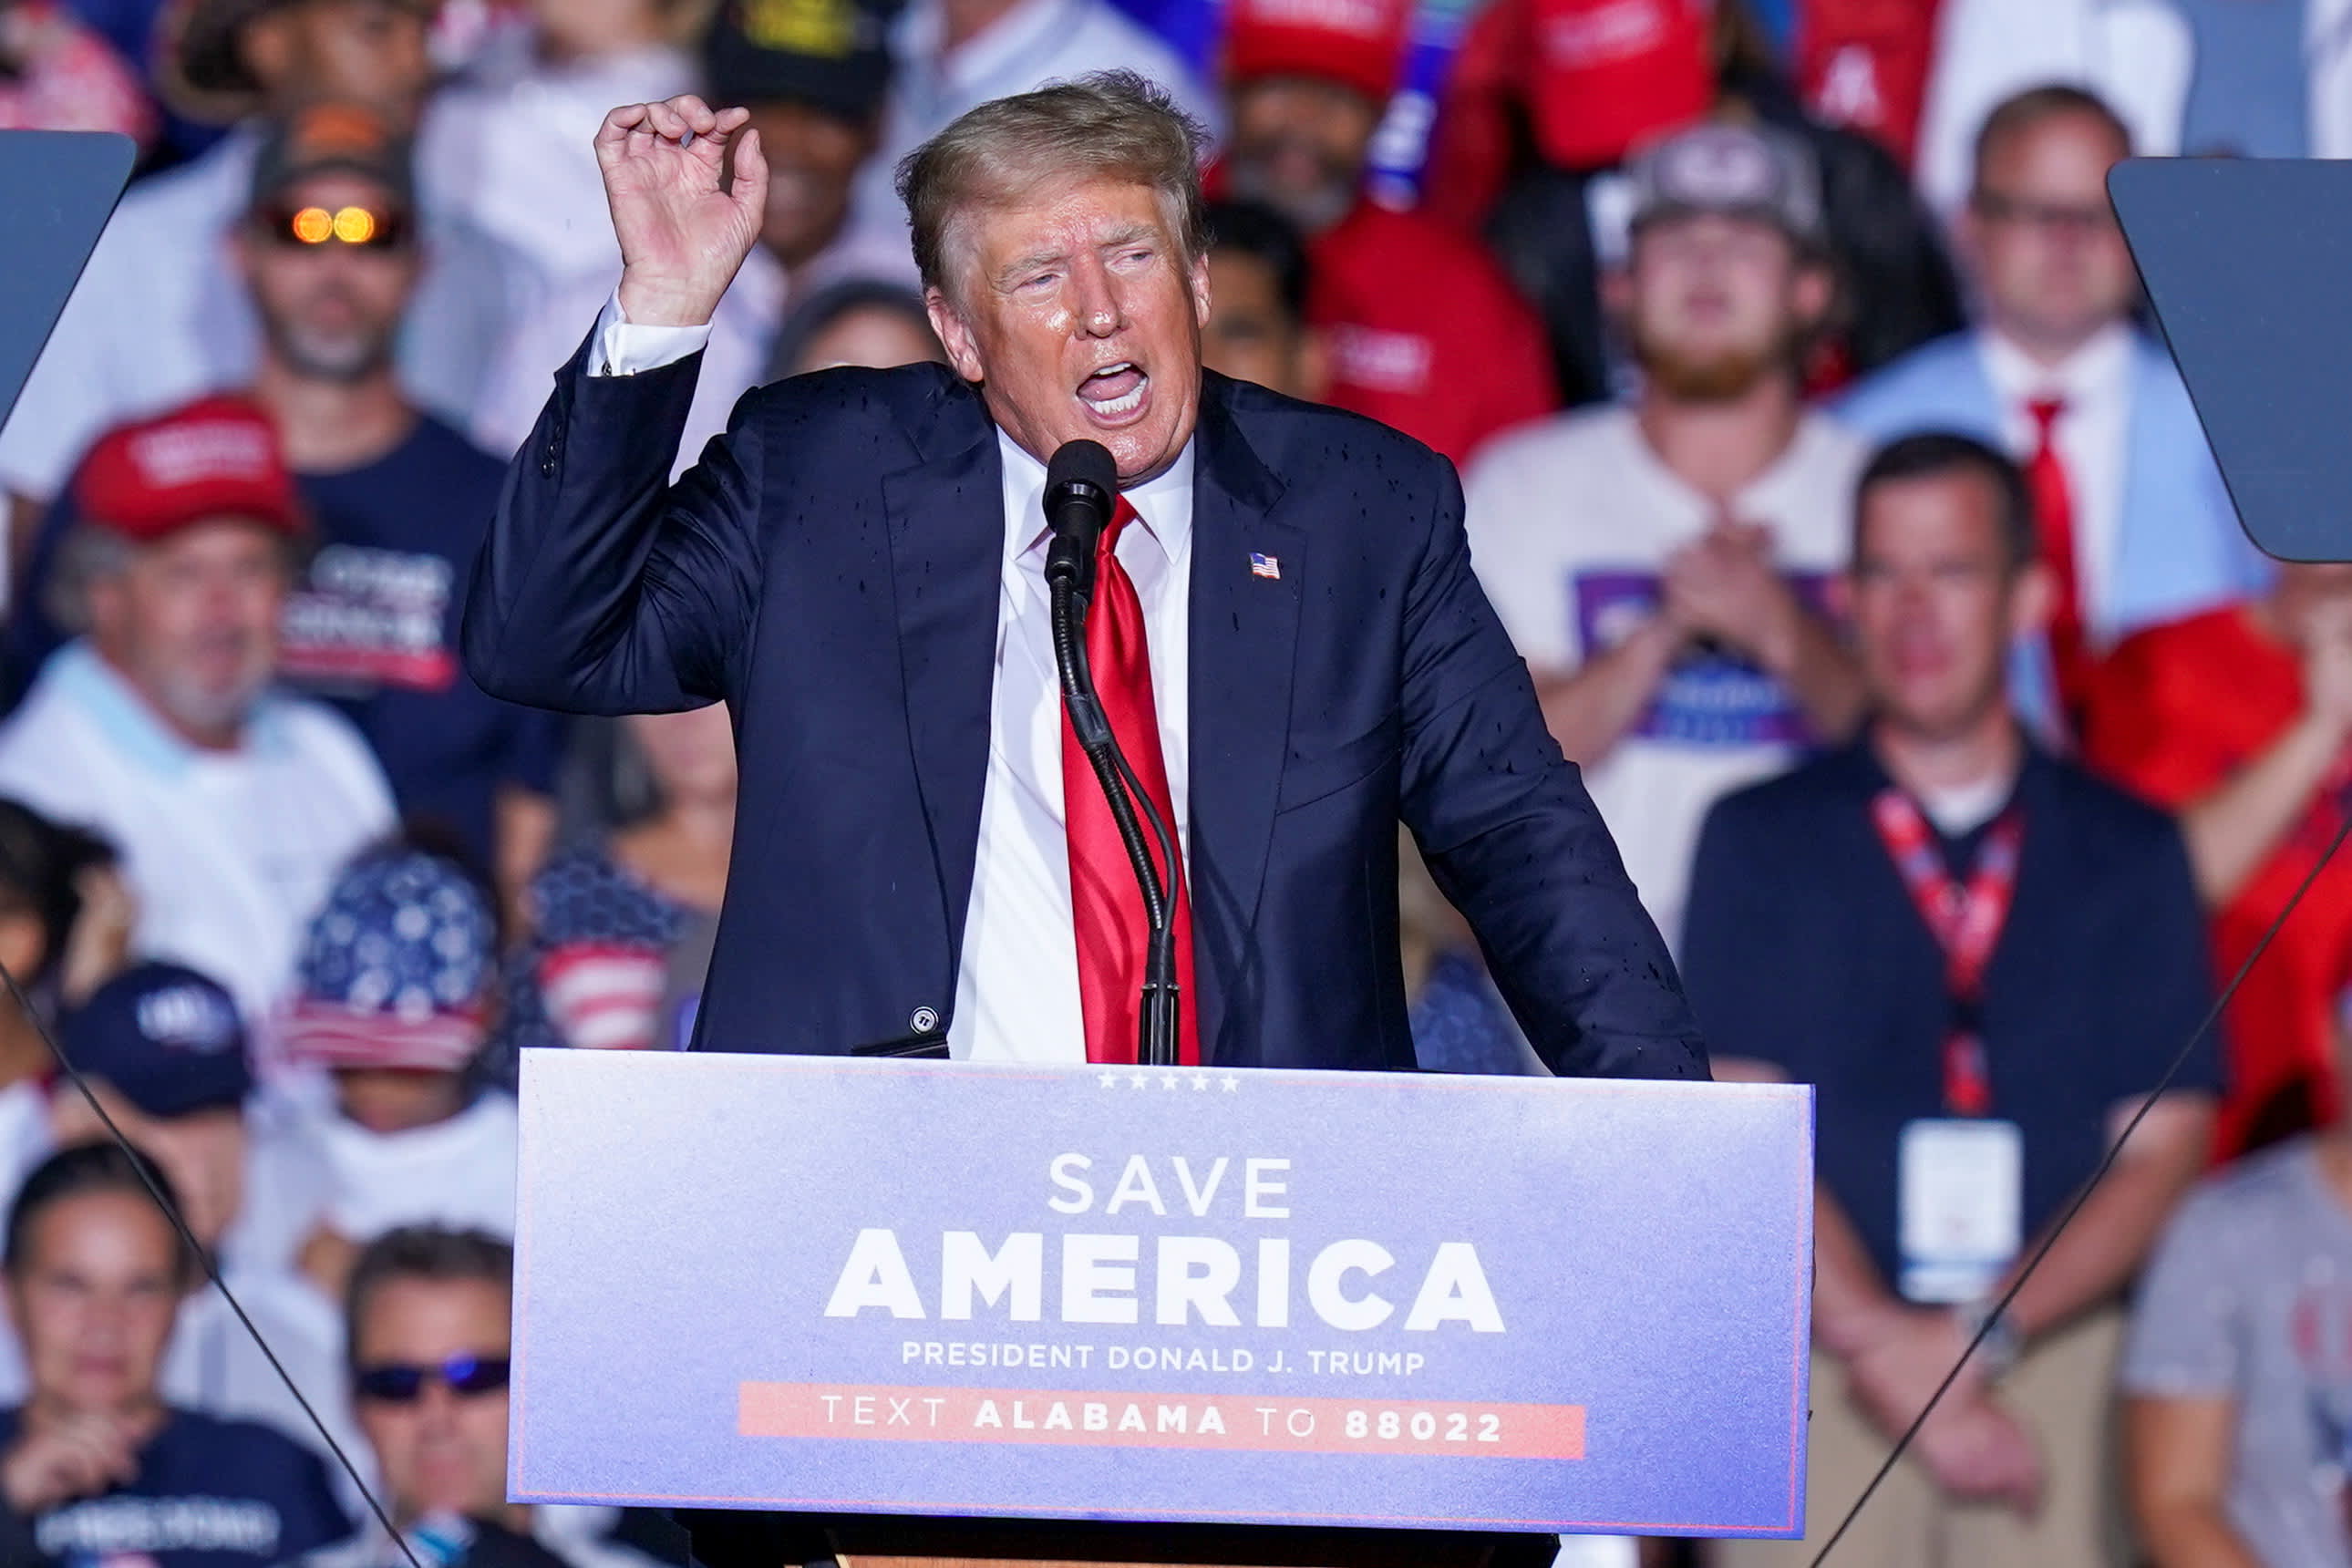 Trump booed at Alabama rally after telling supporters to get vaccinated